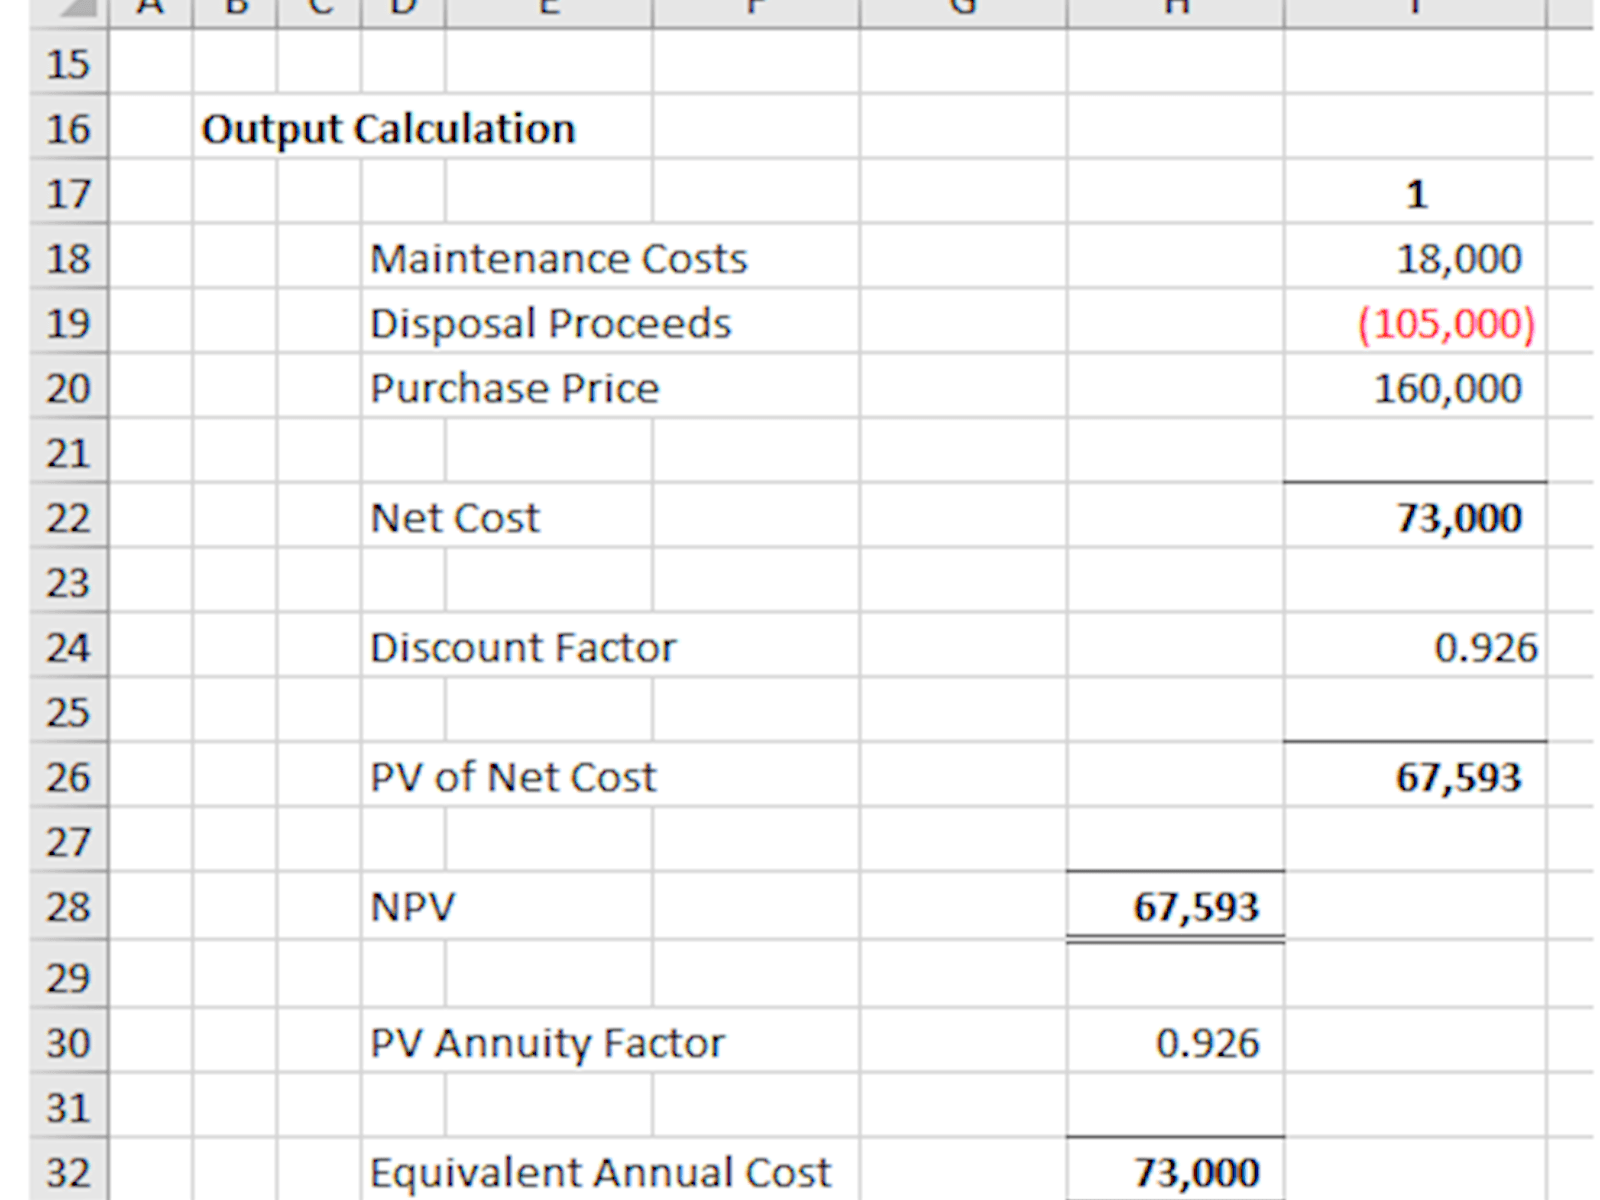 Image of one year assessment of cumulative discount factor